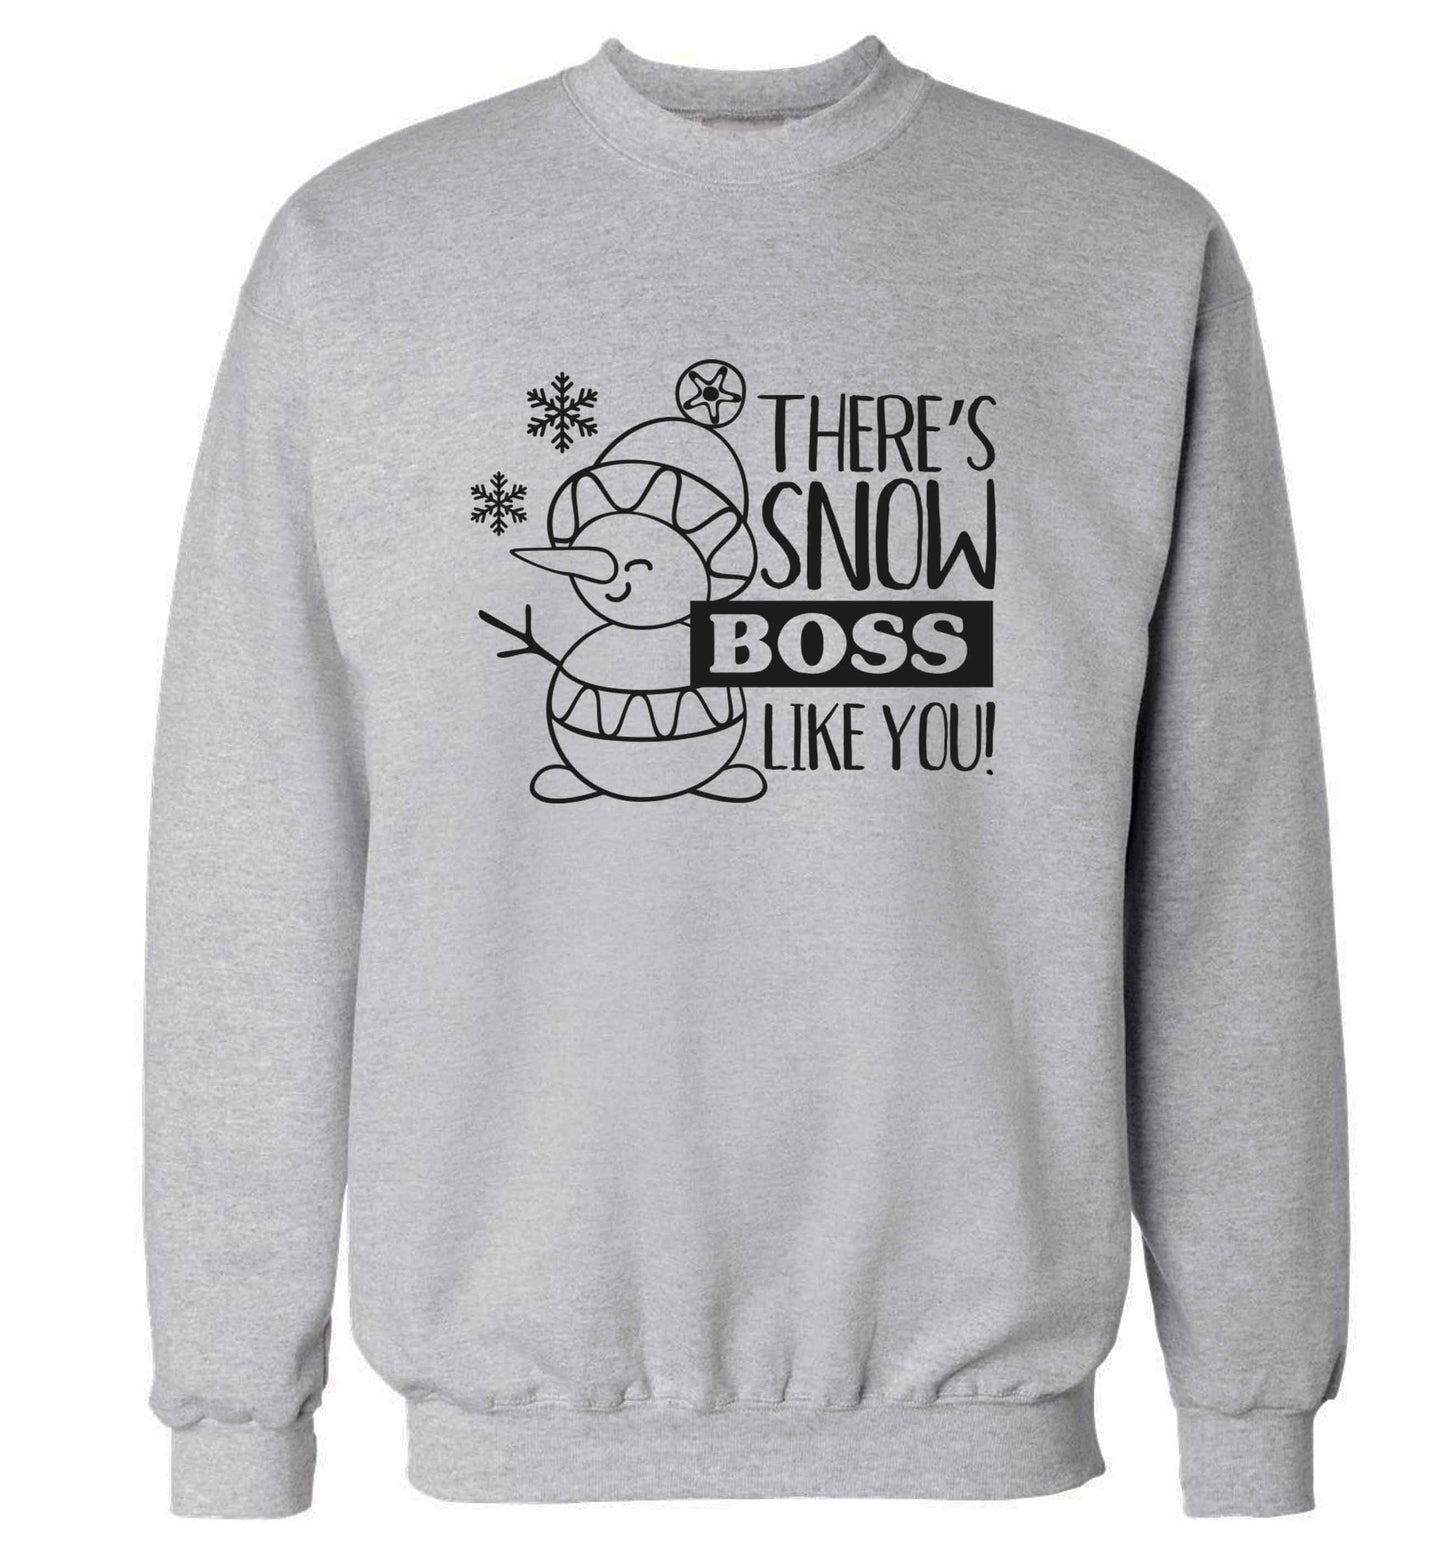 There's snow boss like you adult's unisex grey sweater 2XL